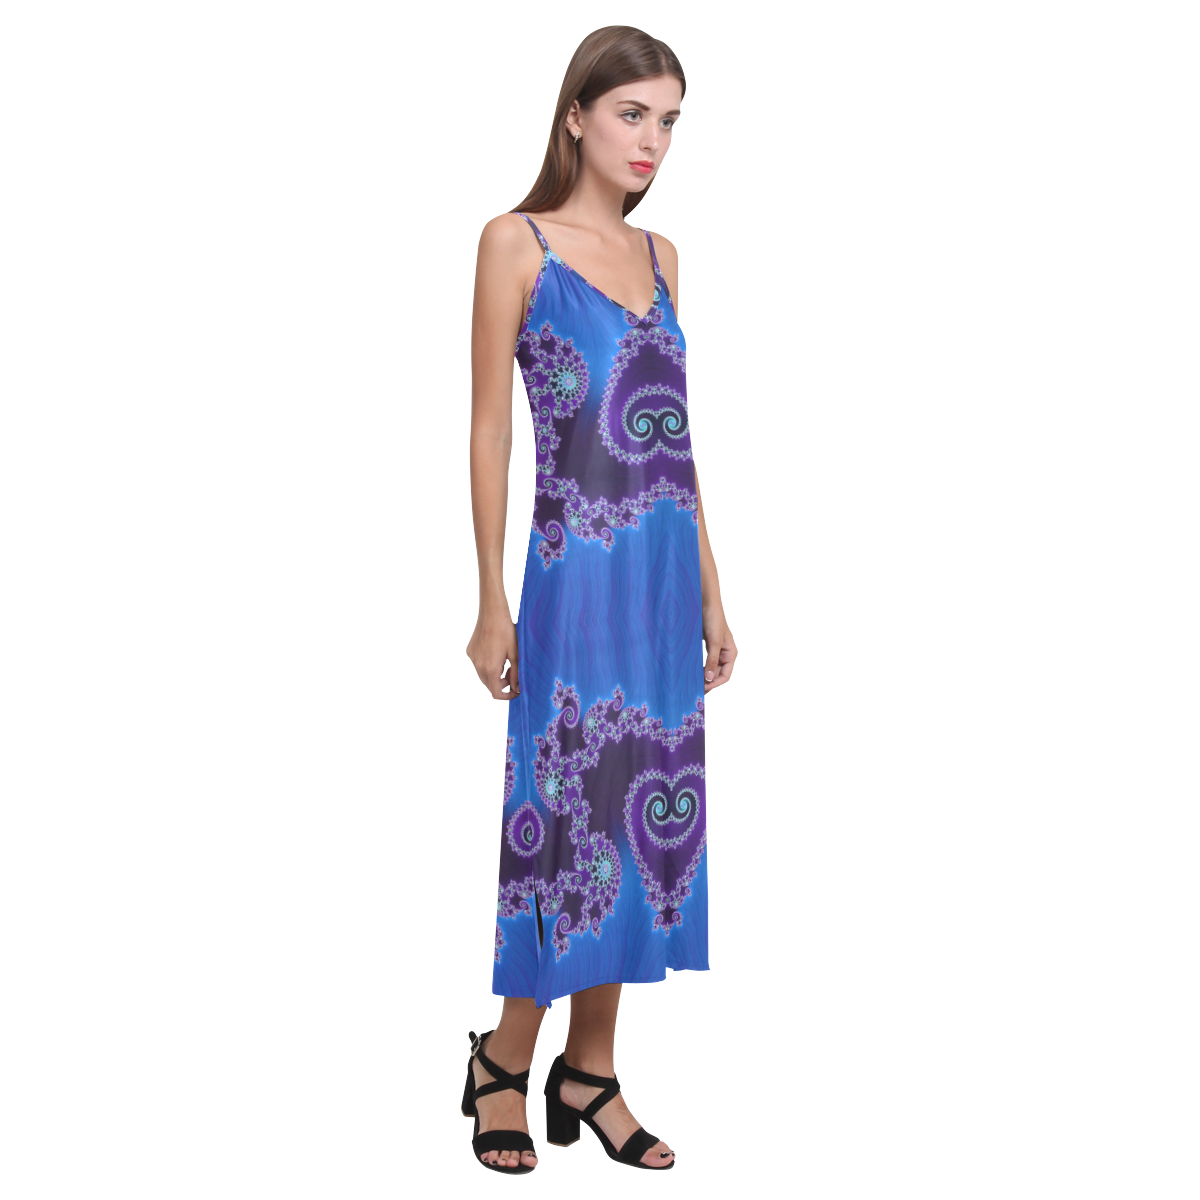 Blue Hearts and Lace Fractal Abstract 2 V-Neck Open Fork Long Dress(Model D18)